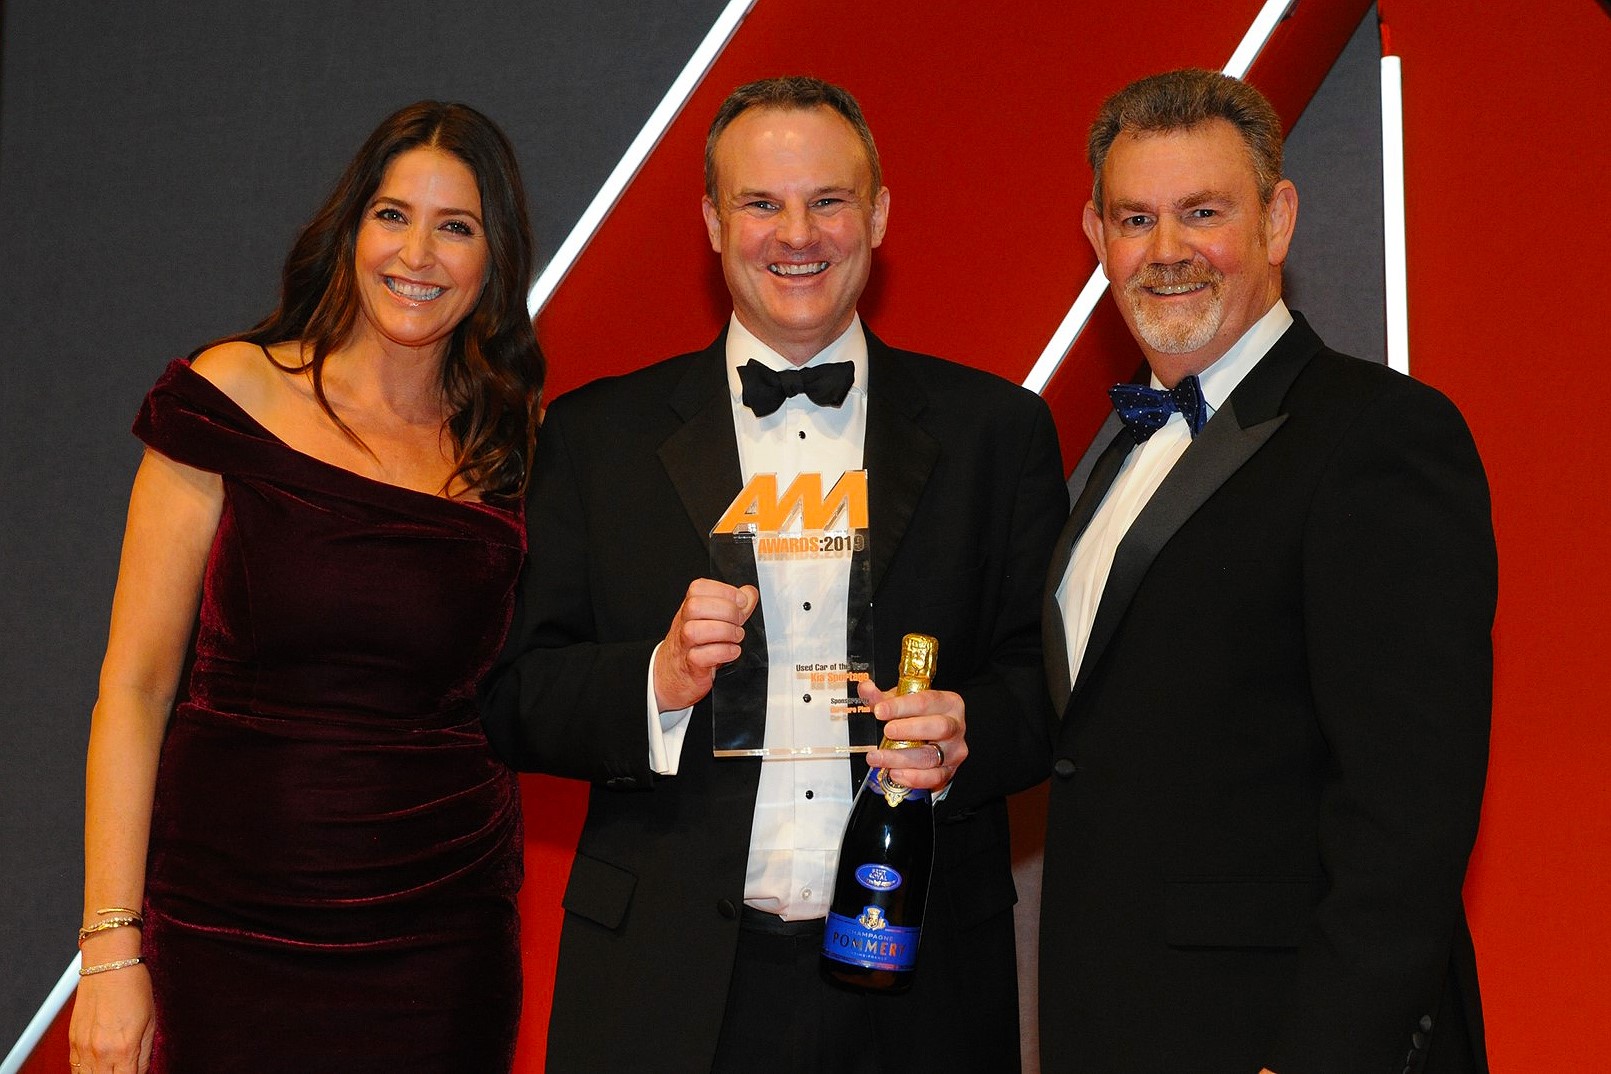 Simon Hetherington, commercial  director, Kia Motors (UK), accepts the  award from Philip Morrison, head of  corporate sales, Car Care Plan, right, and host Lisa Snowdon, left 